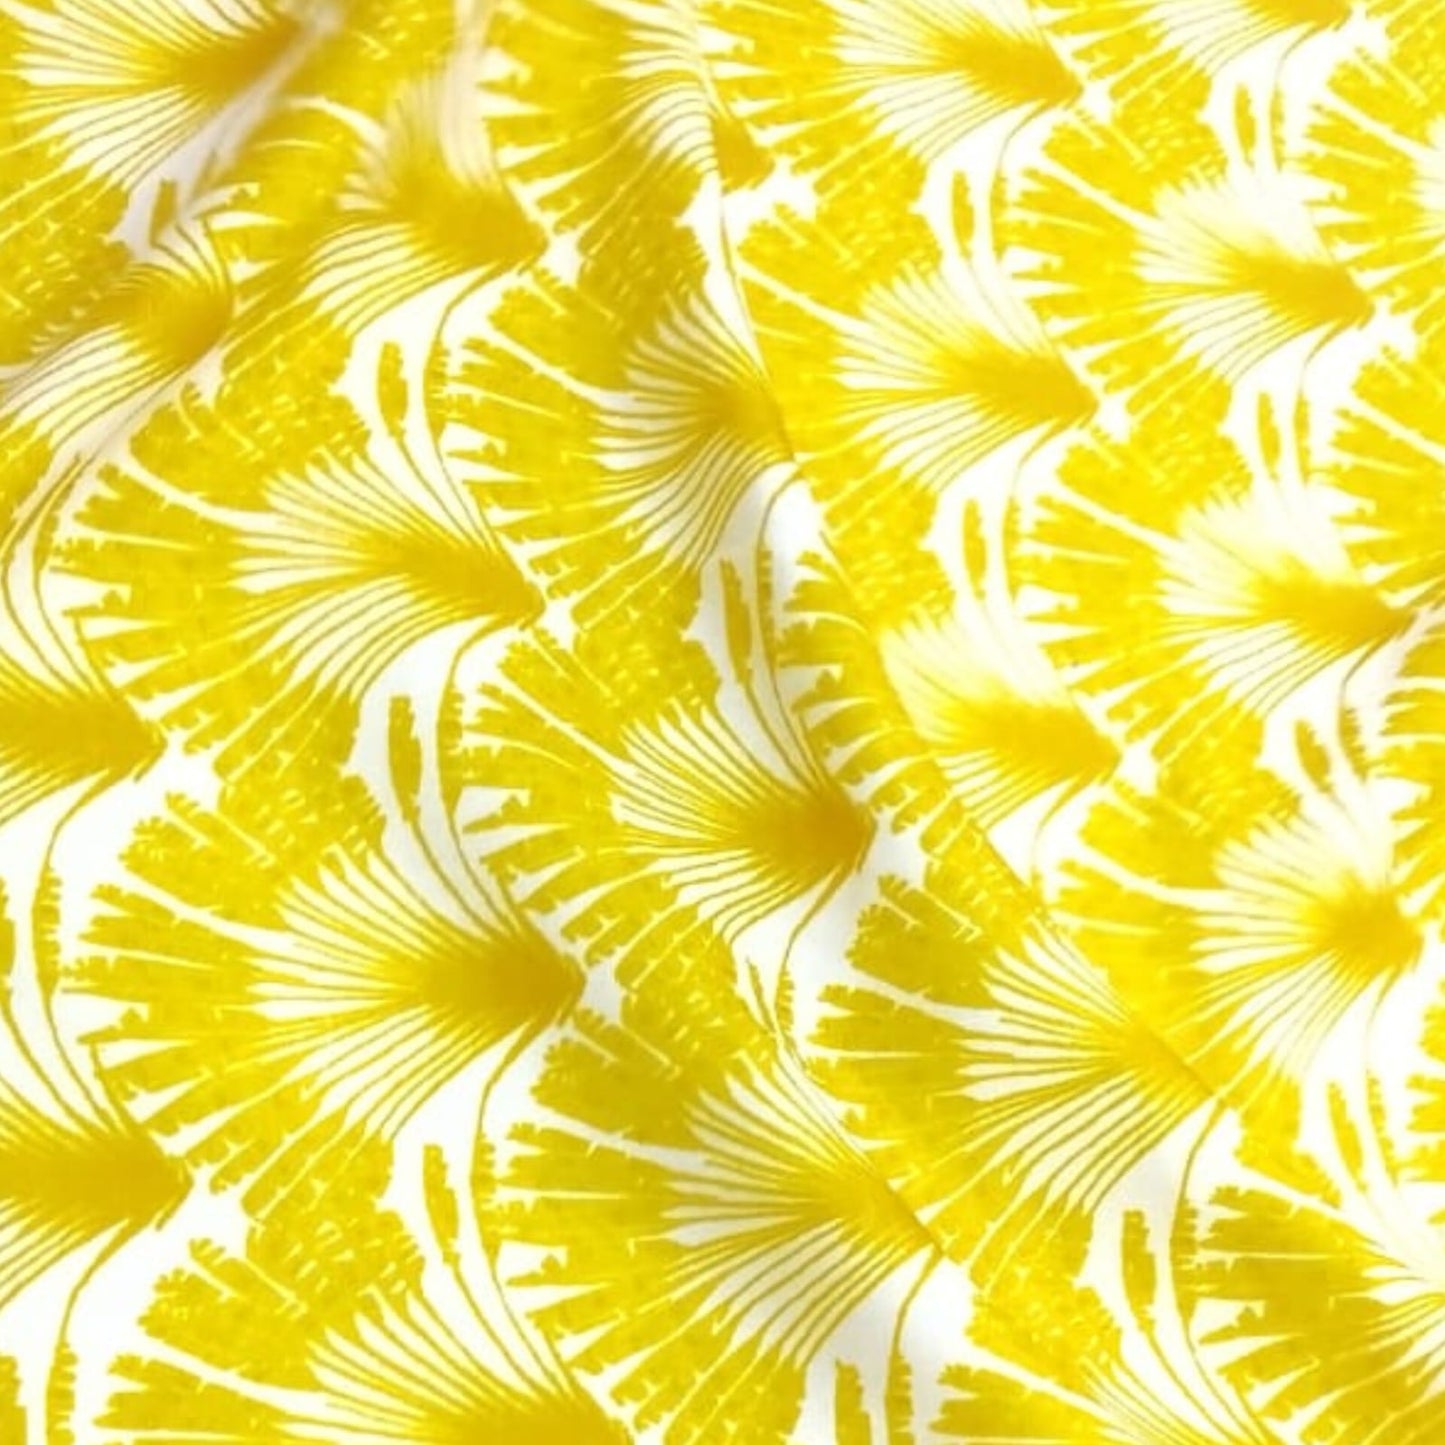 Linen Cotton Fabric with Aesthitic Prints in Yellow and White